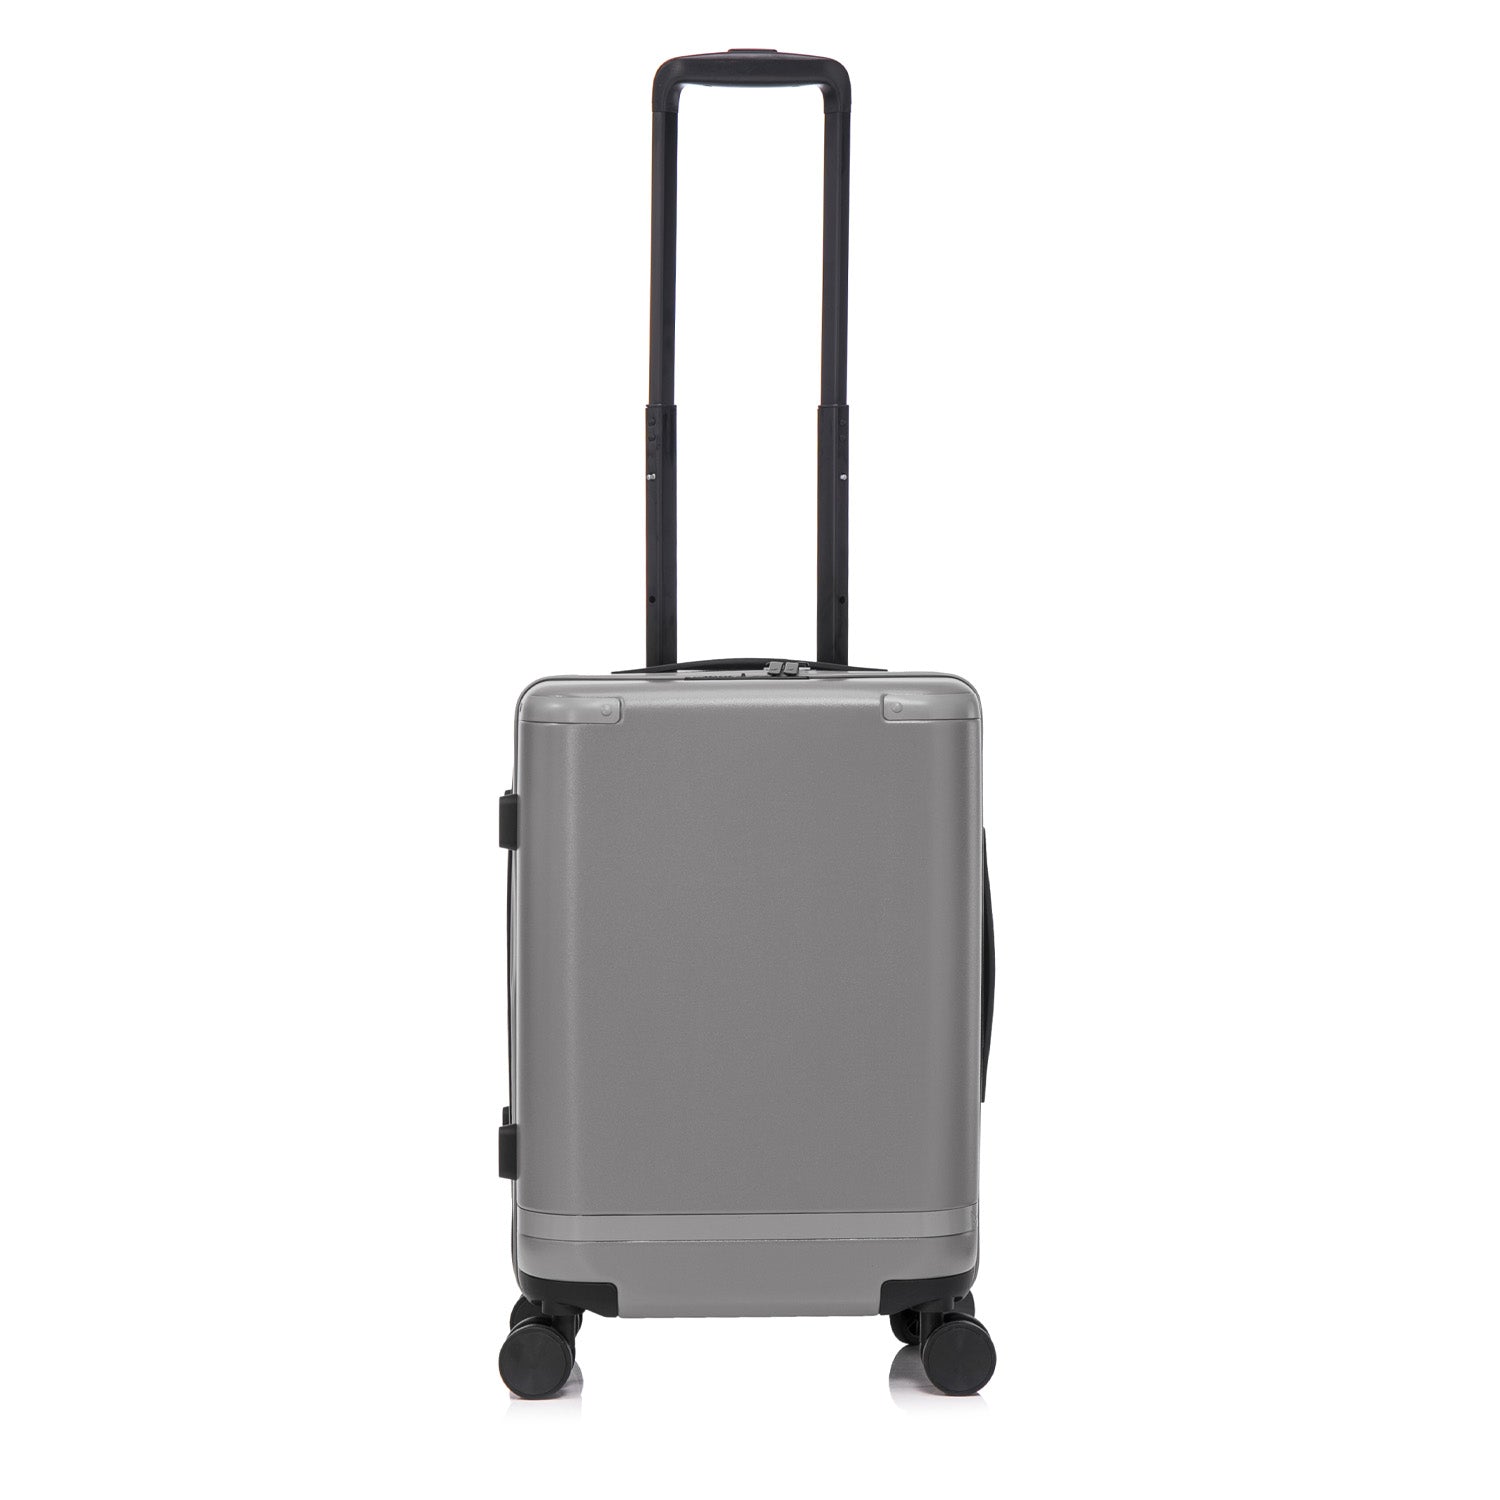 Qantas- QF250 ROME 56cm Small cabin spinner suitcase - Charcoal